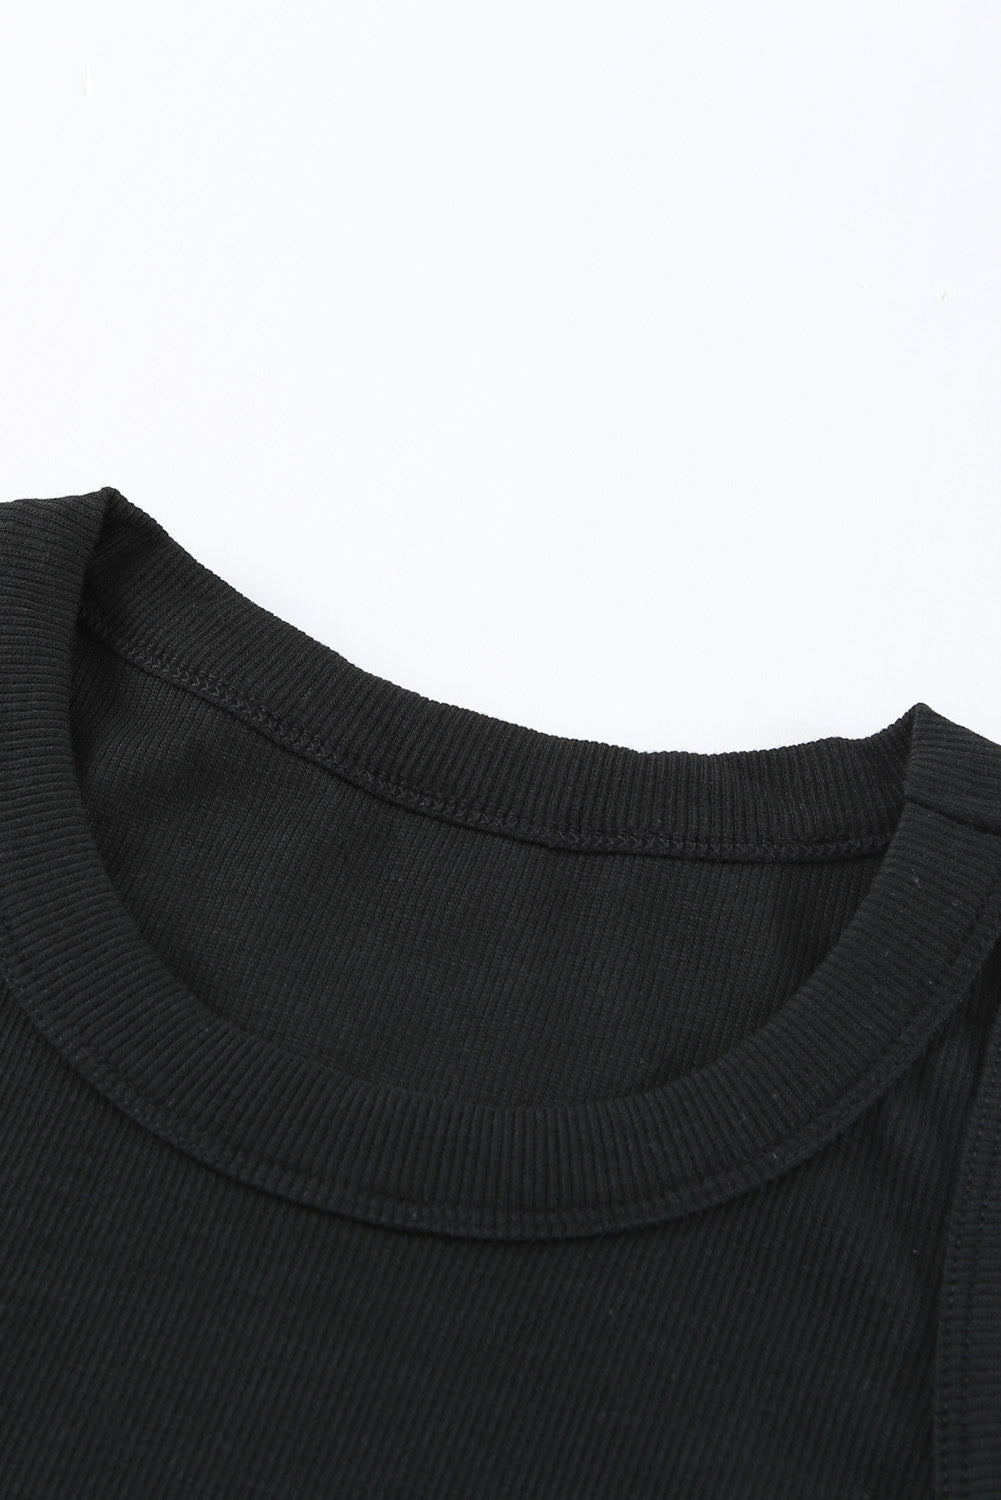 Solid Black Round Neck Ribbed Tank Top MTJ0027